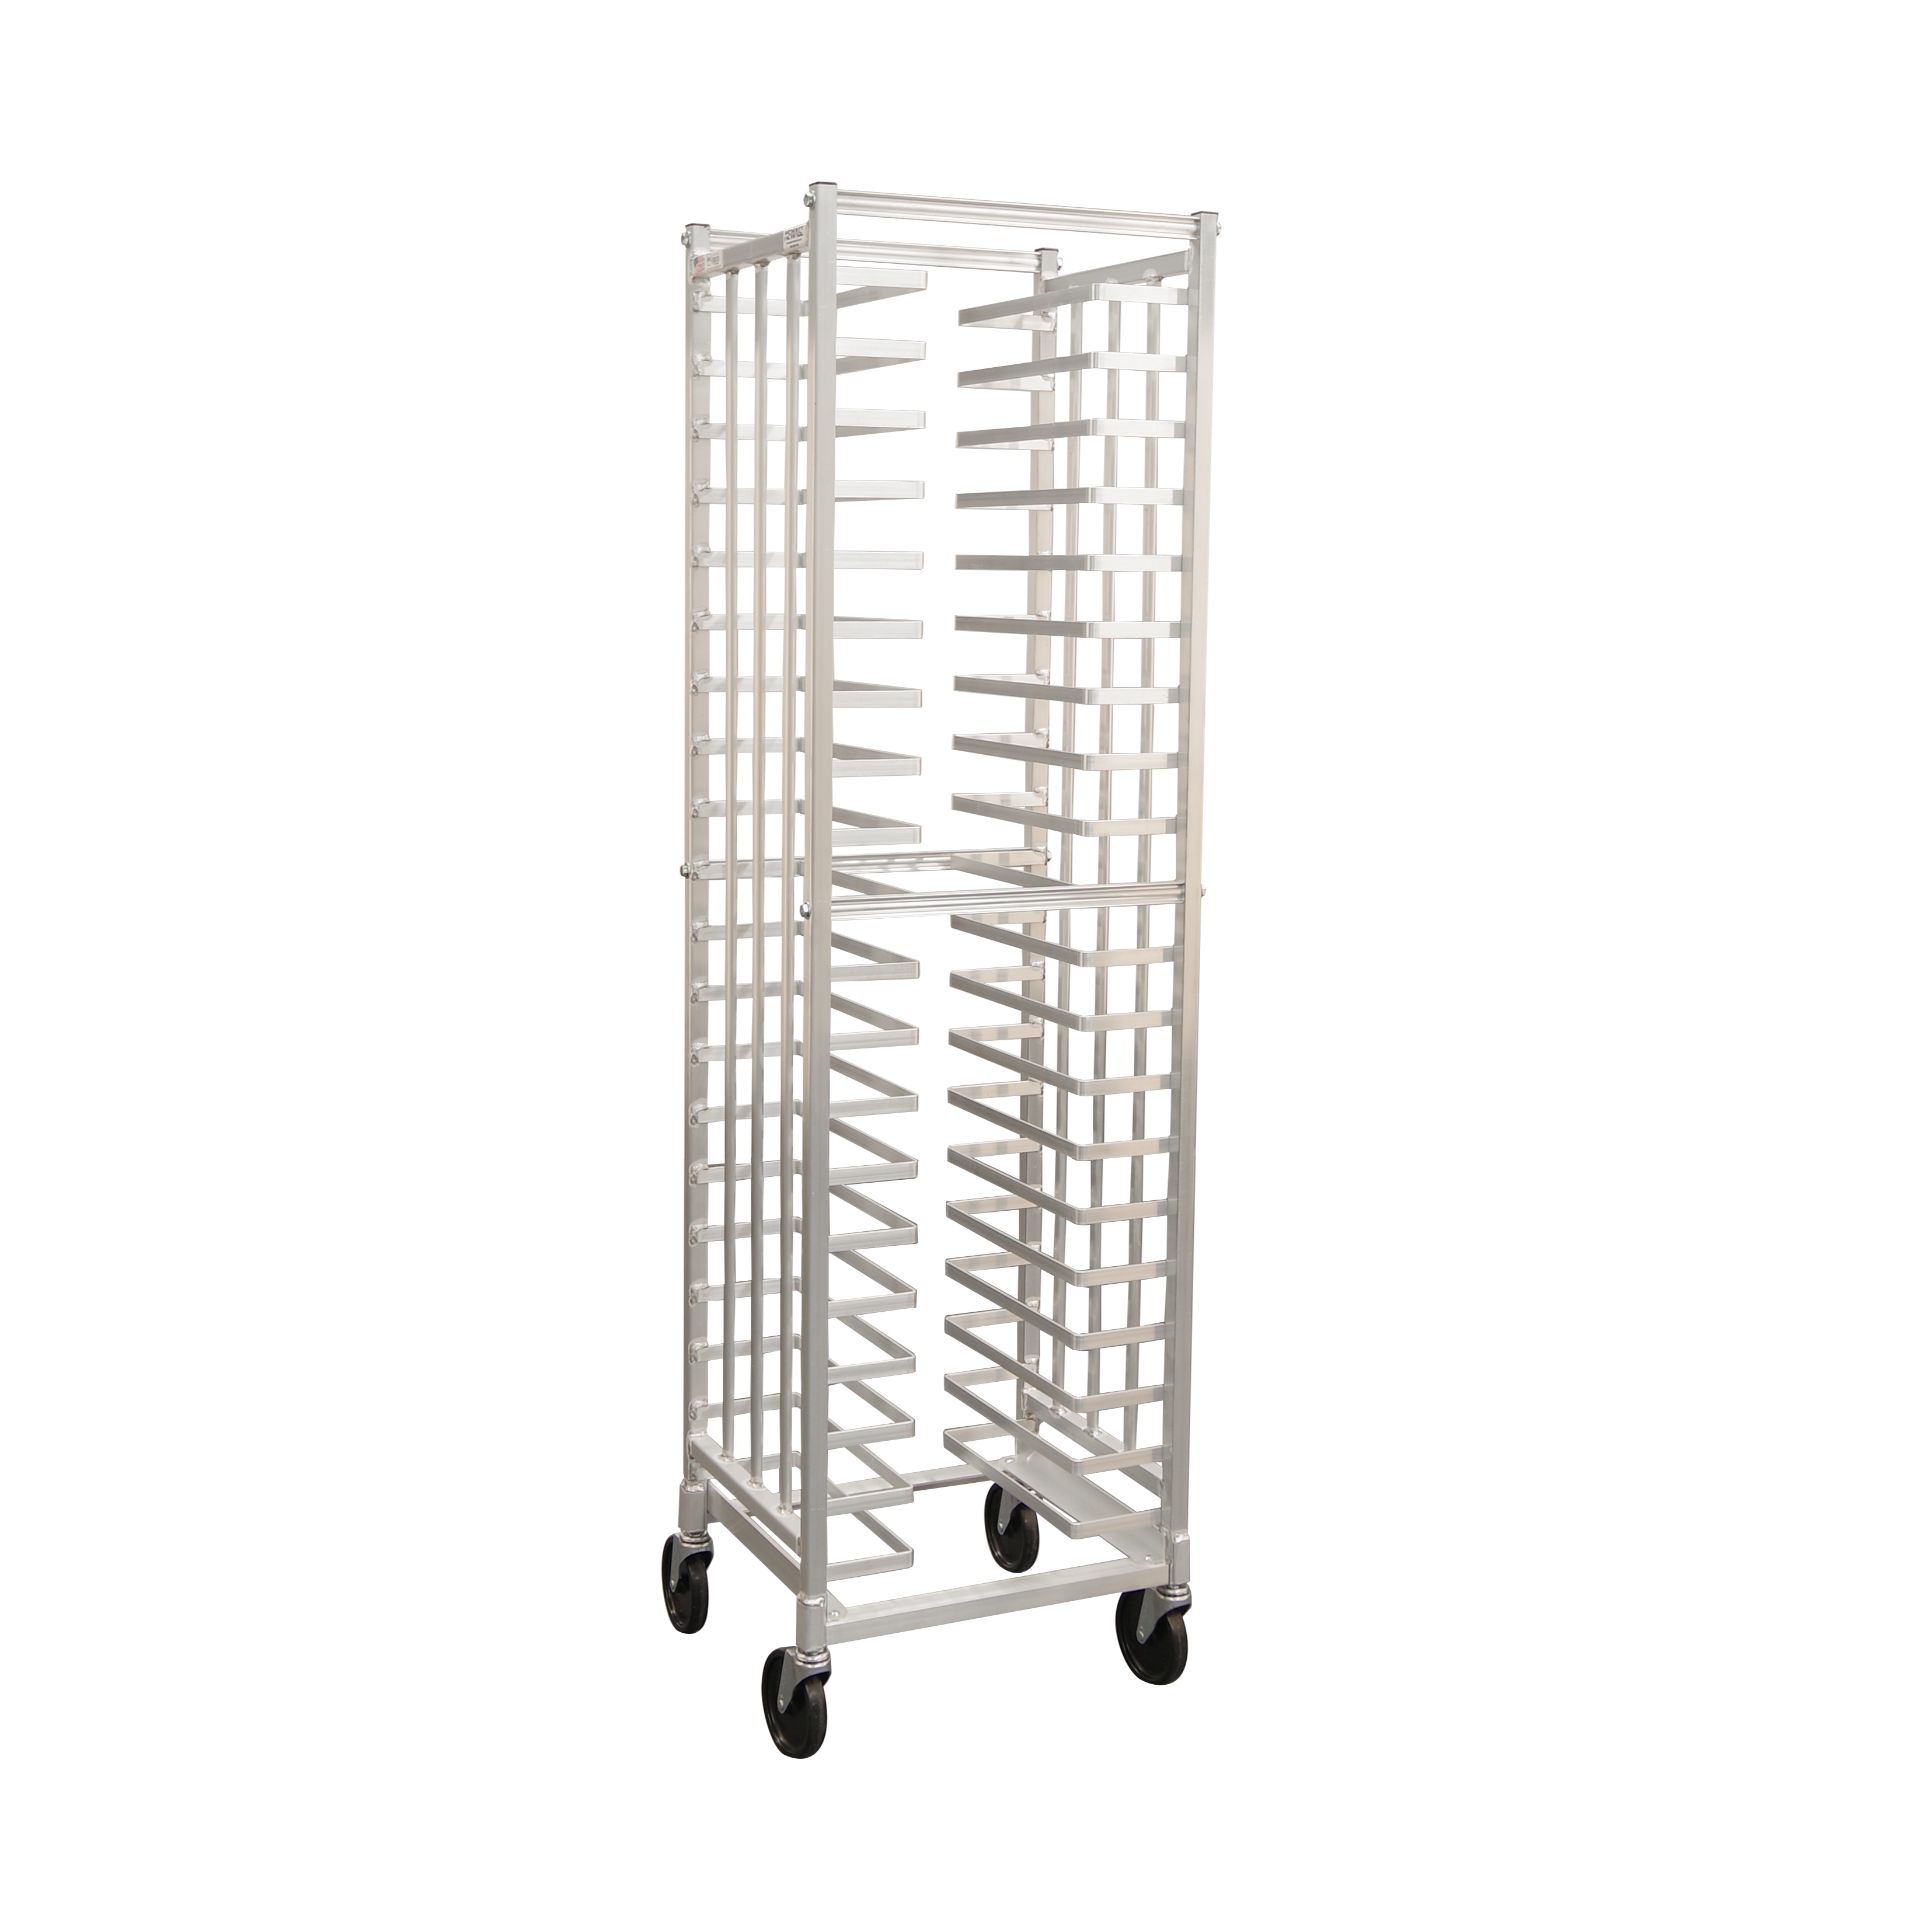 PVIFS VYSG Optional Cover for PZ and LPZ Single Pizza Racks 17-3/4 Length x 22-1/2 Width x 67 Height 